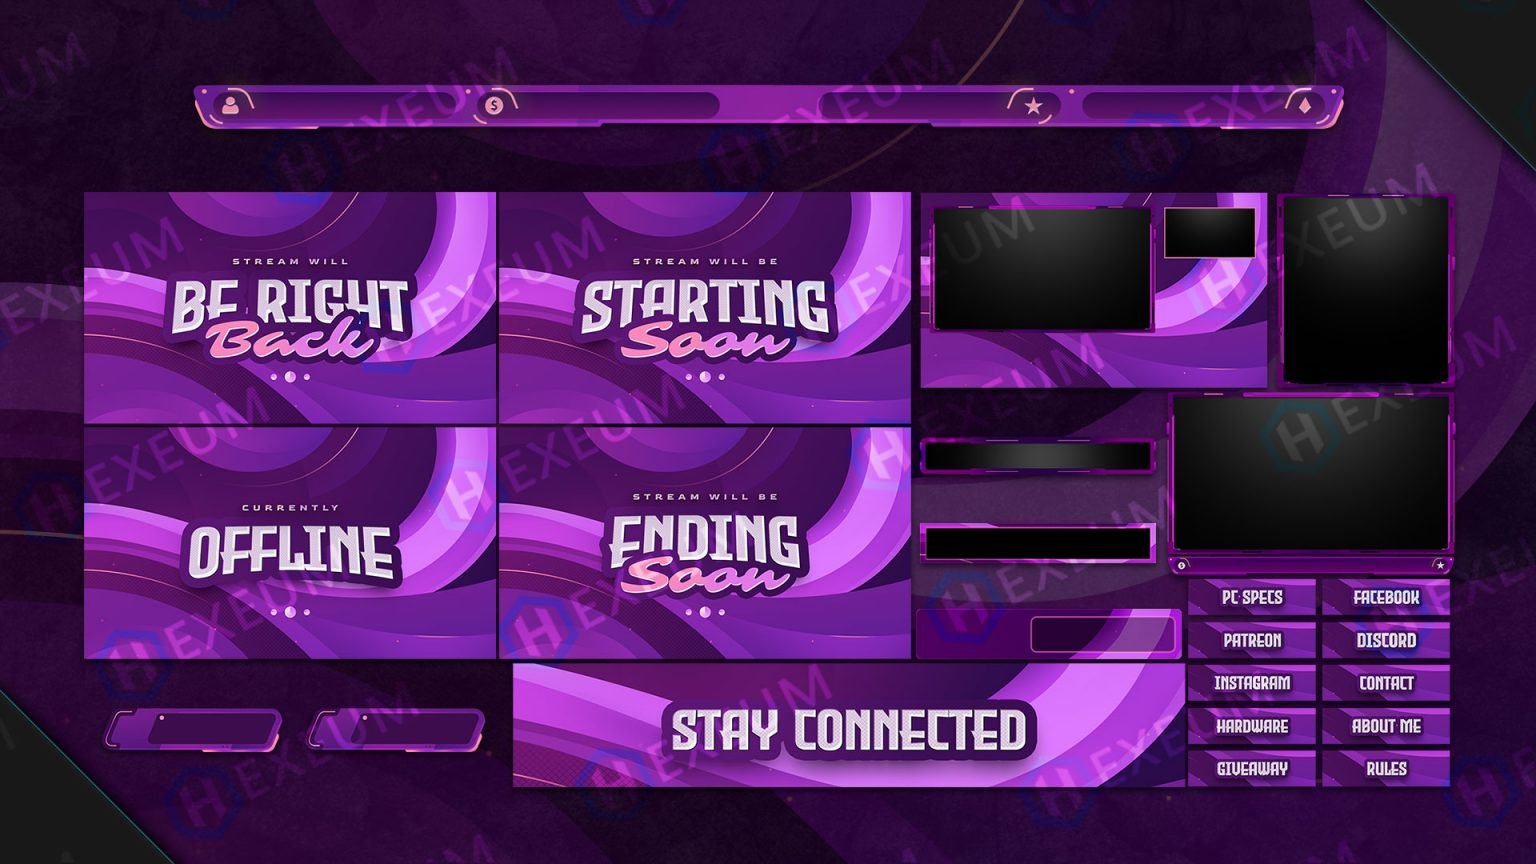 intermission screen for twitch